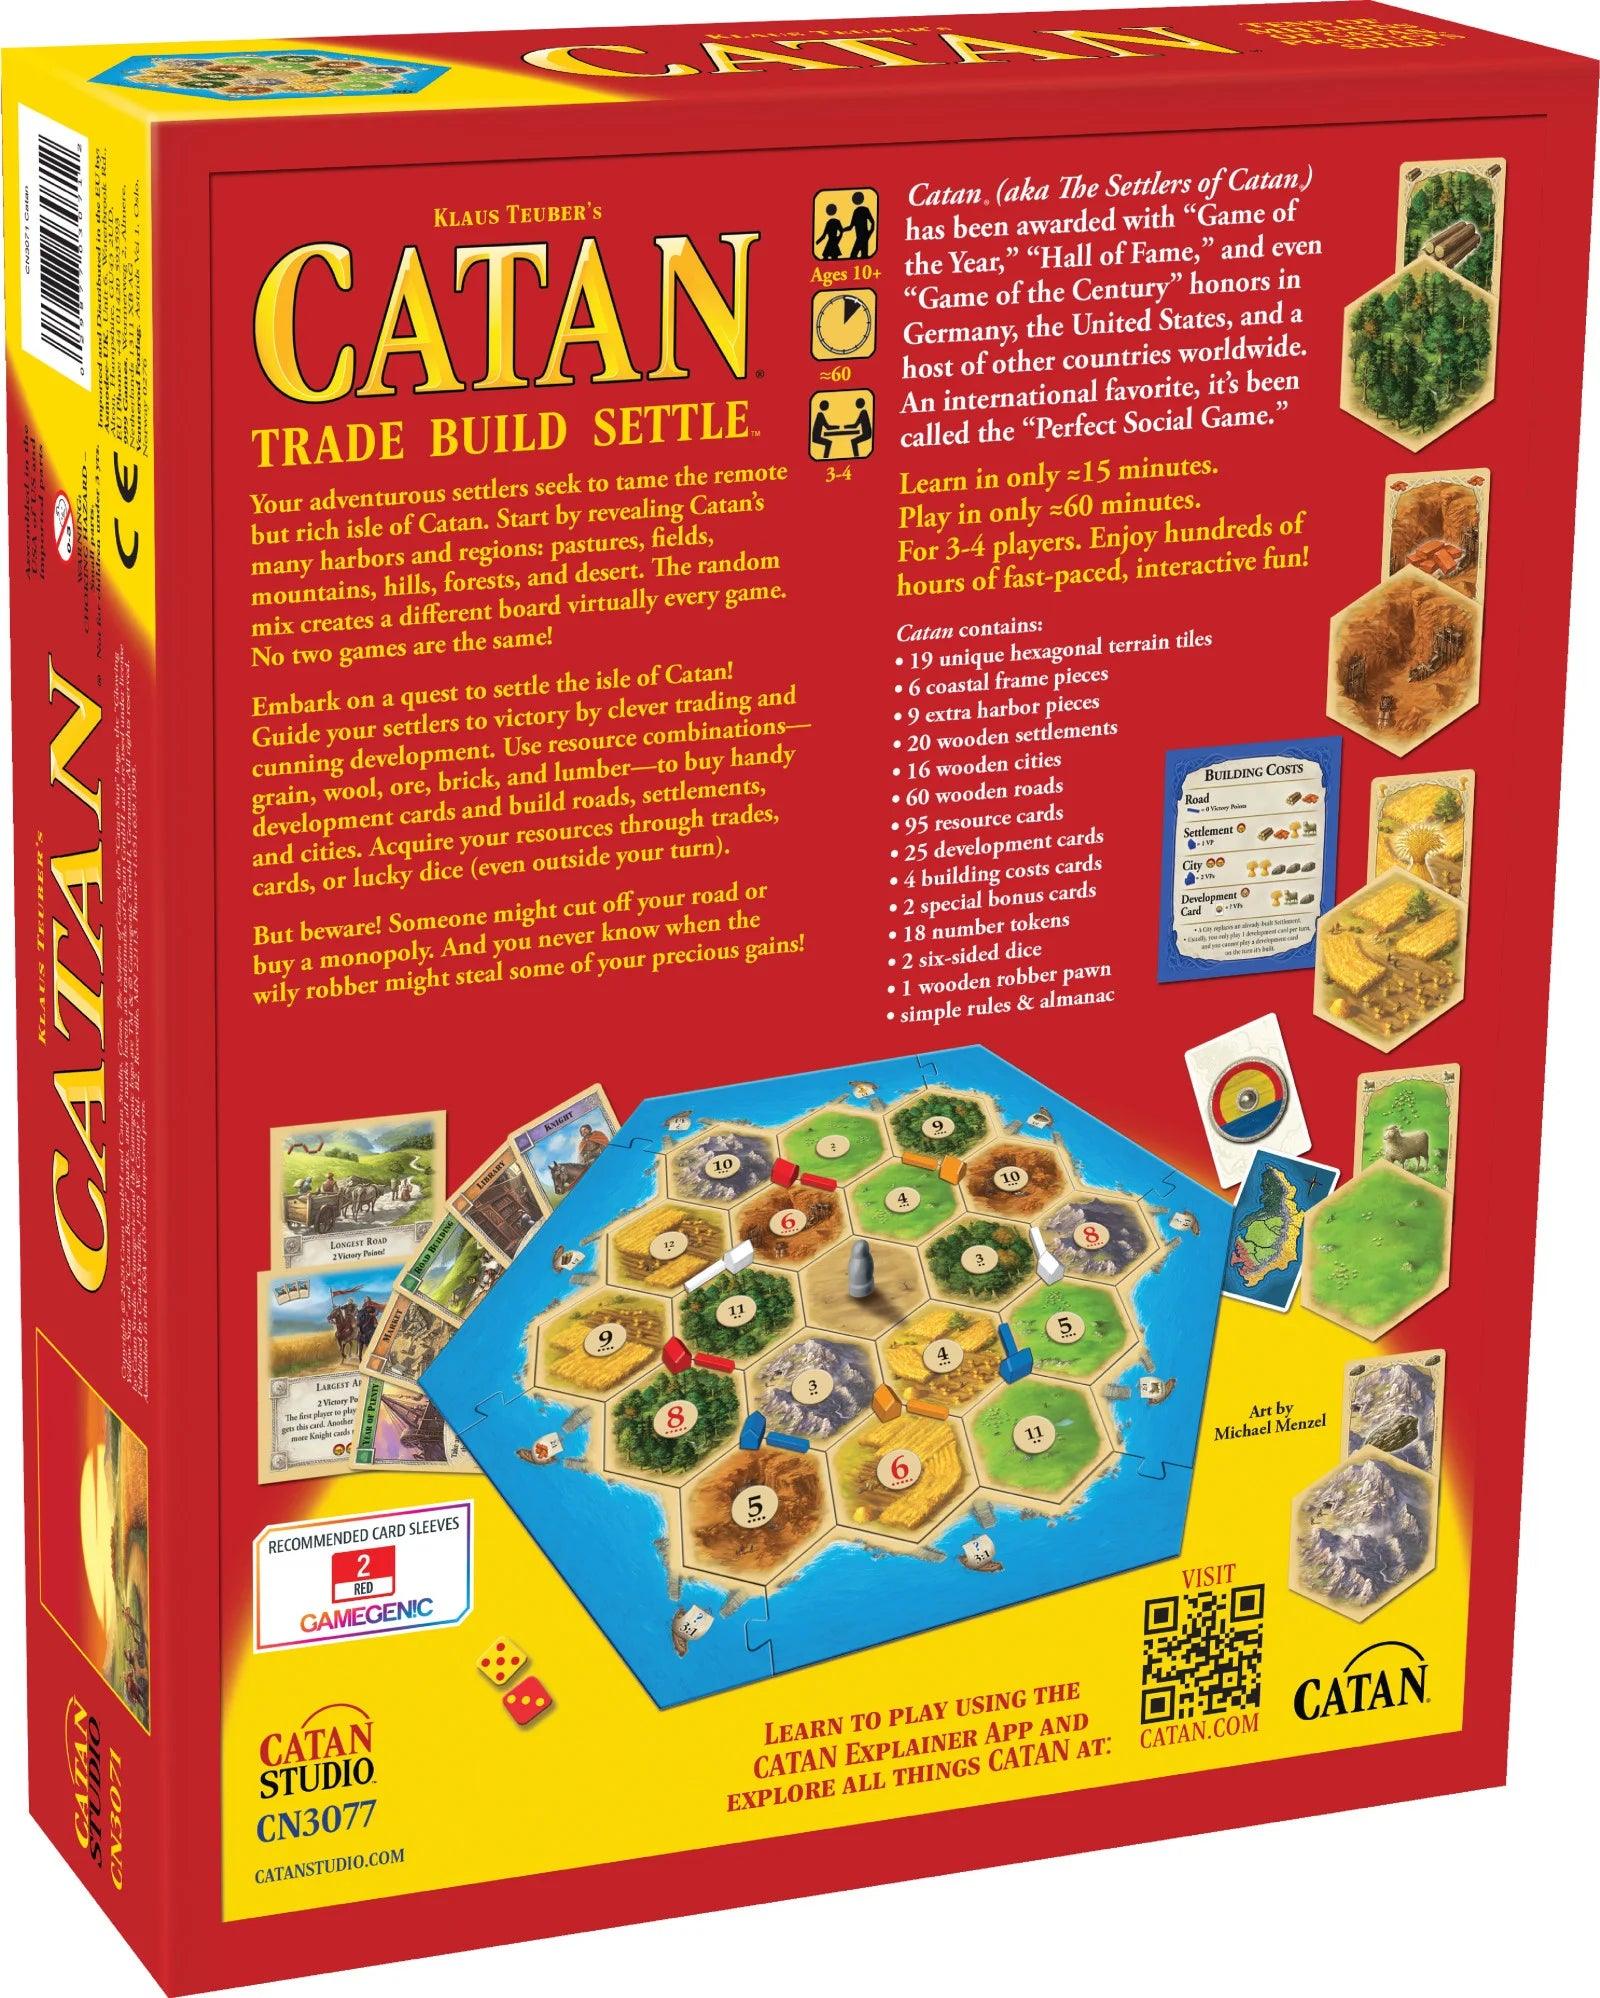 Catan Trade Build Settle Board Game - Eclipse Games Puzzles Novelties